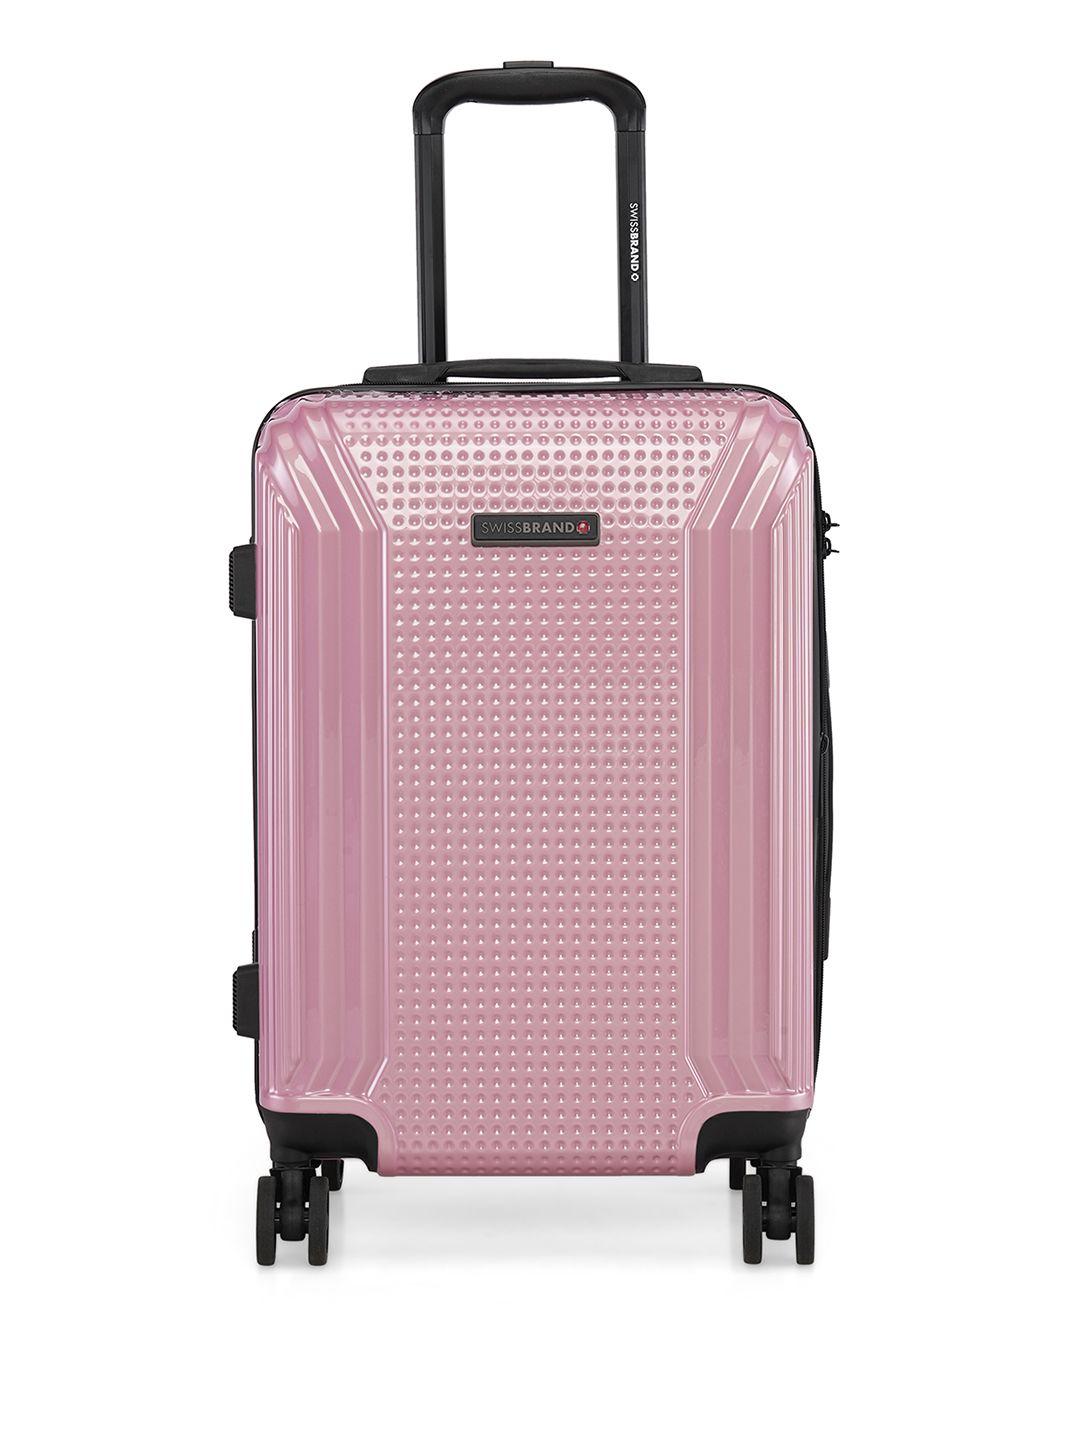 swiss brand rose gold-toned textured vernier 360-degree rotation hard-sided cabin trolley suitcase